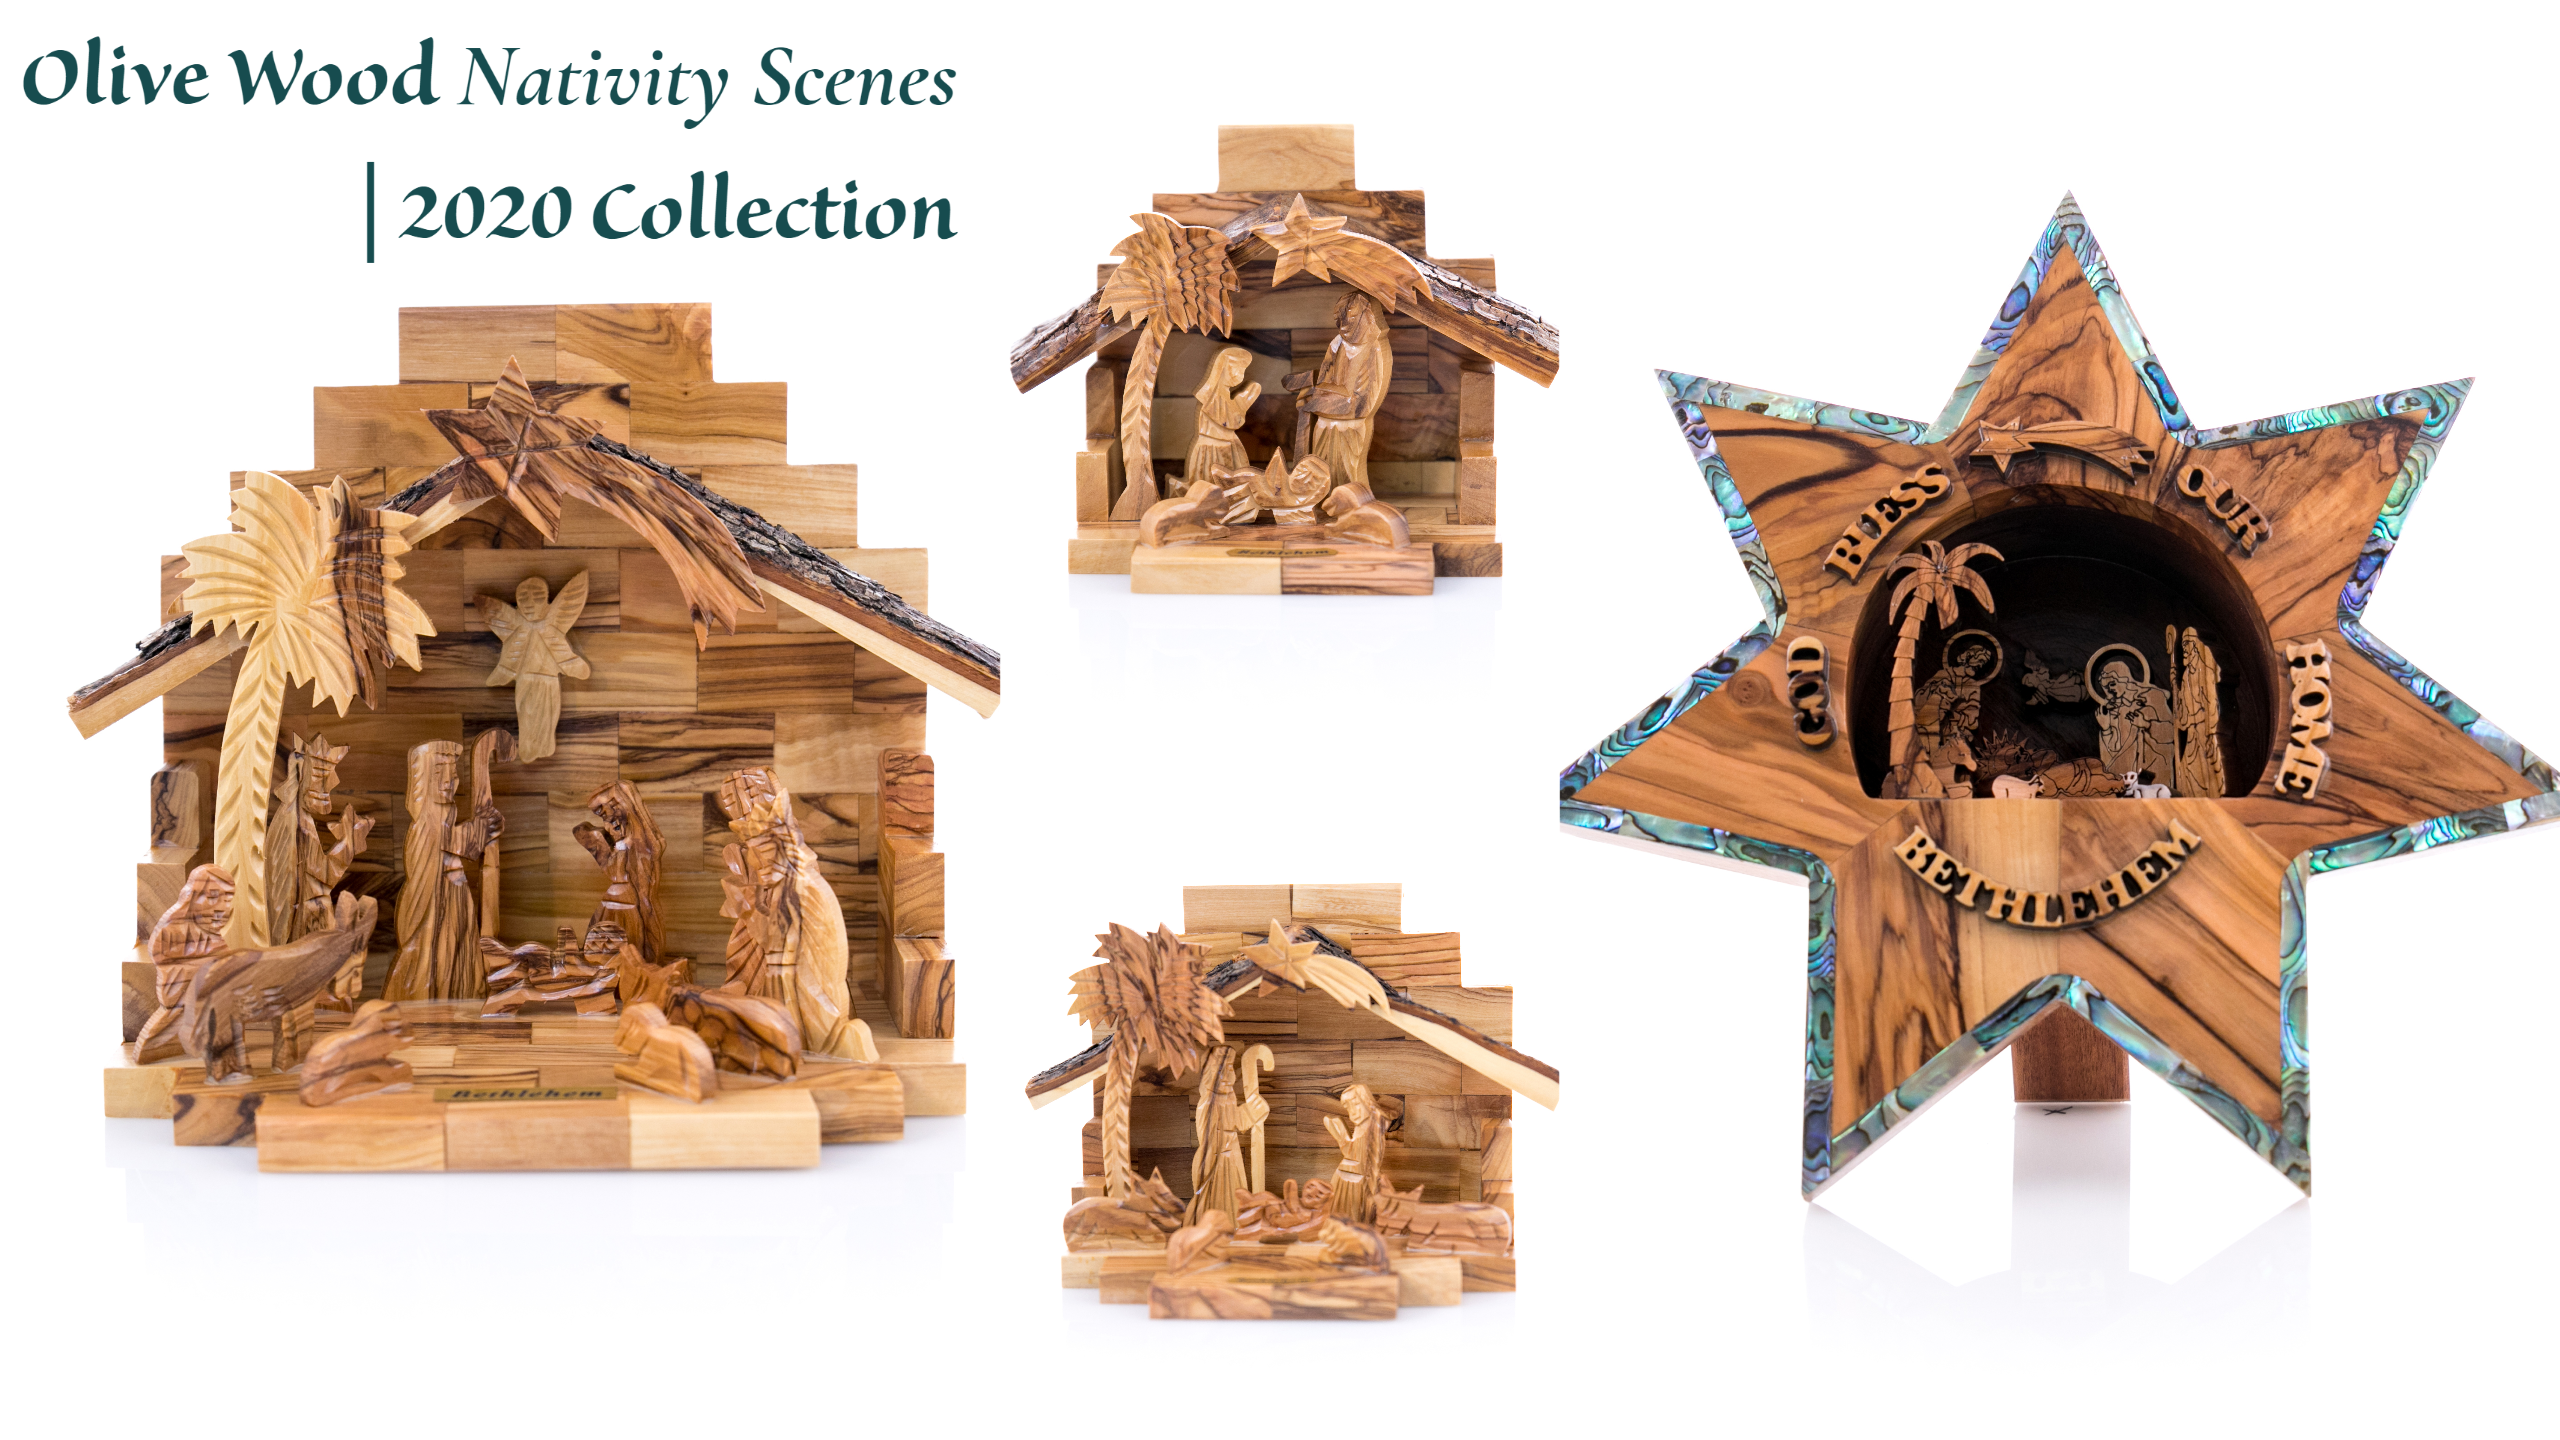 Olive Wood Nativity Scenes | 2020 Collection